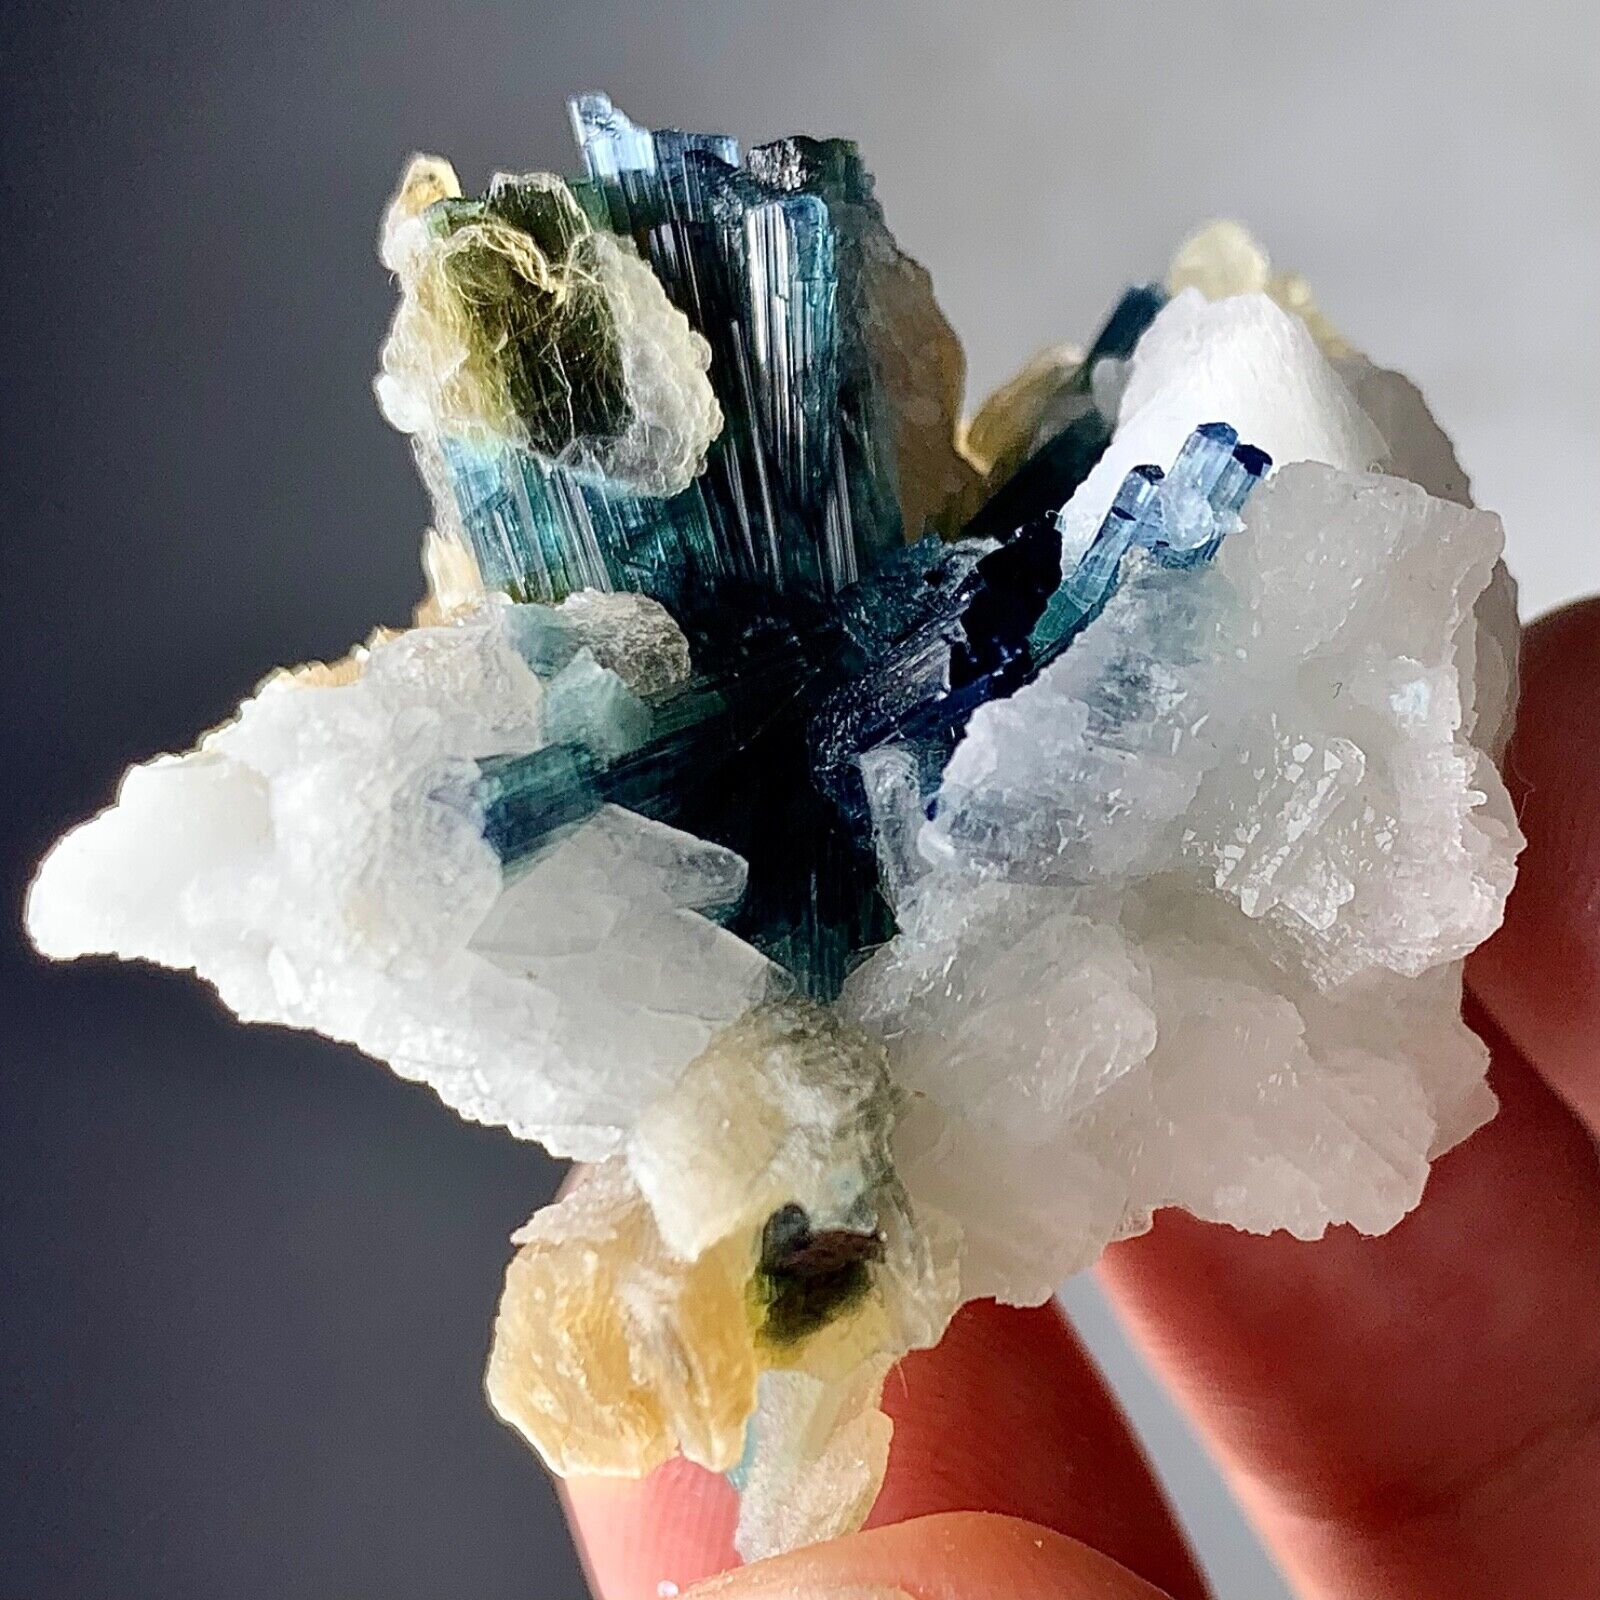 122 Carat Indicolite Tourmaline Crystal Bunch With Feldspar From Afghanistan